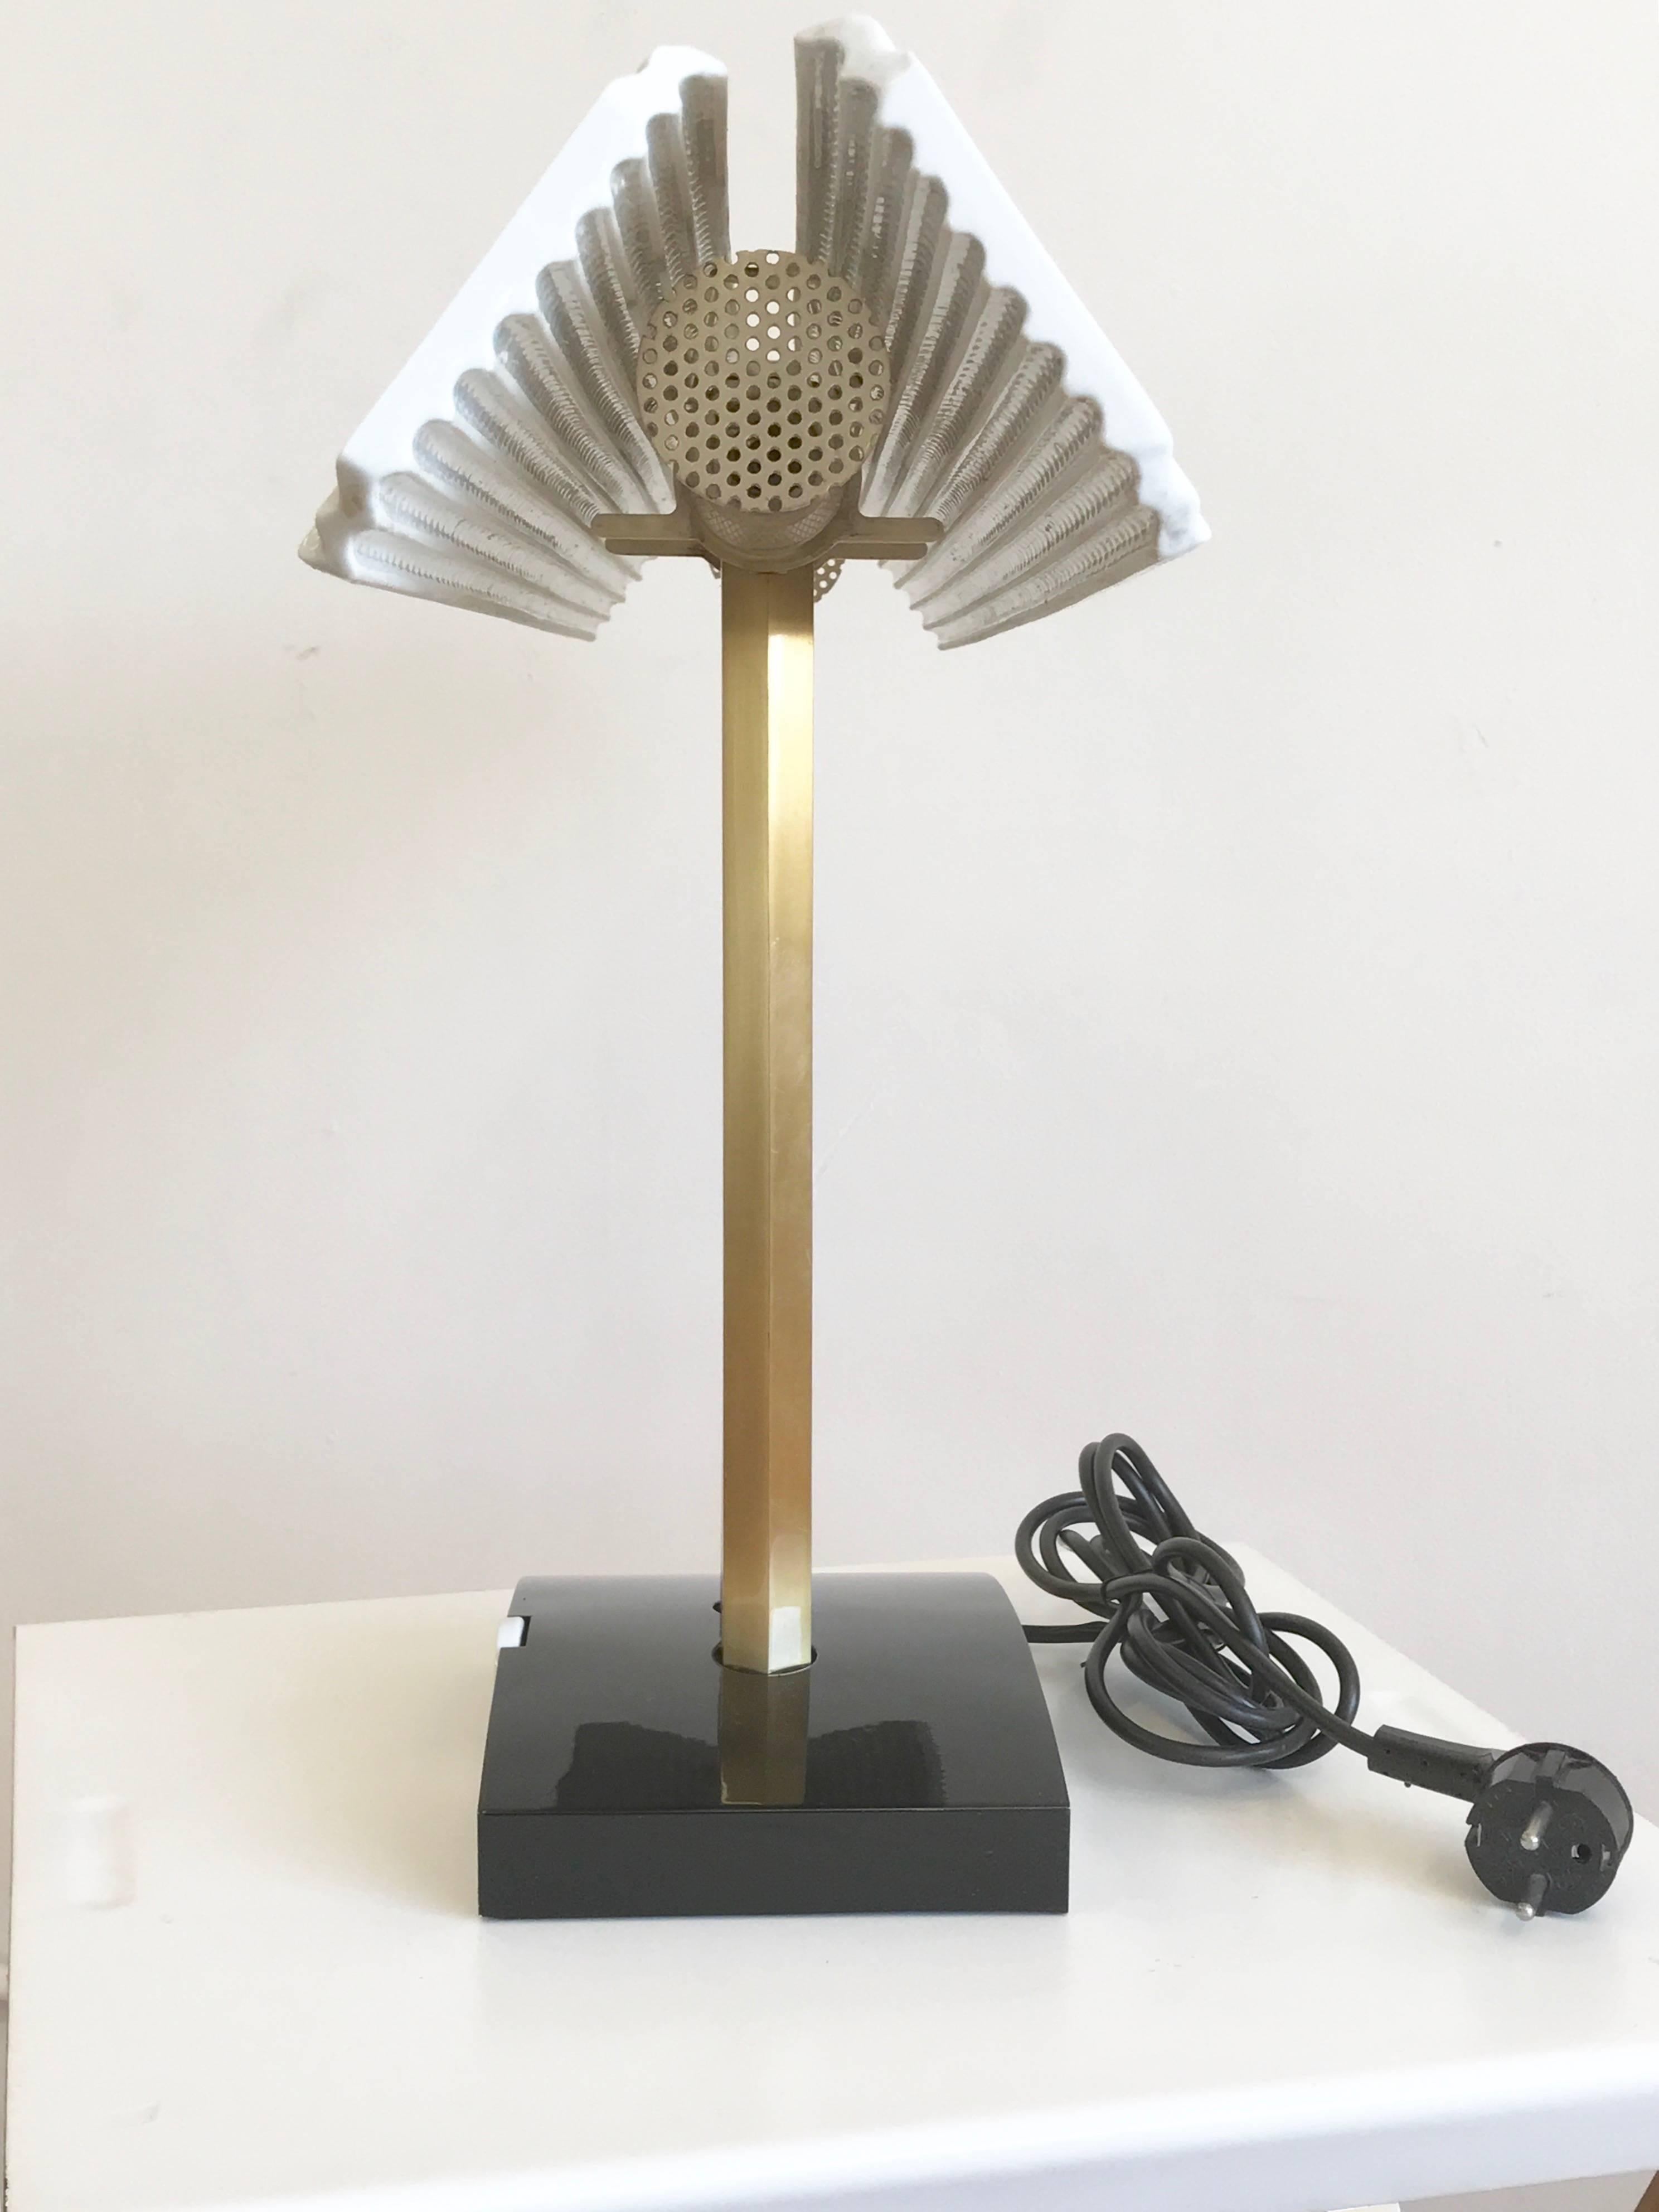 Rare Capalonga table lamp, designed by Afra & Tobia Scarpa, manufactured by Flos in 1982 . Polished brass, enameled metal, porcelain bisque reflector. Dimmer light intensity. 

Size: 15.7" H, 27.5" W, 5.9" D 

Literature: G.